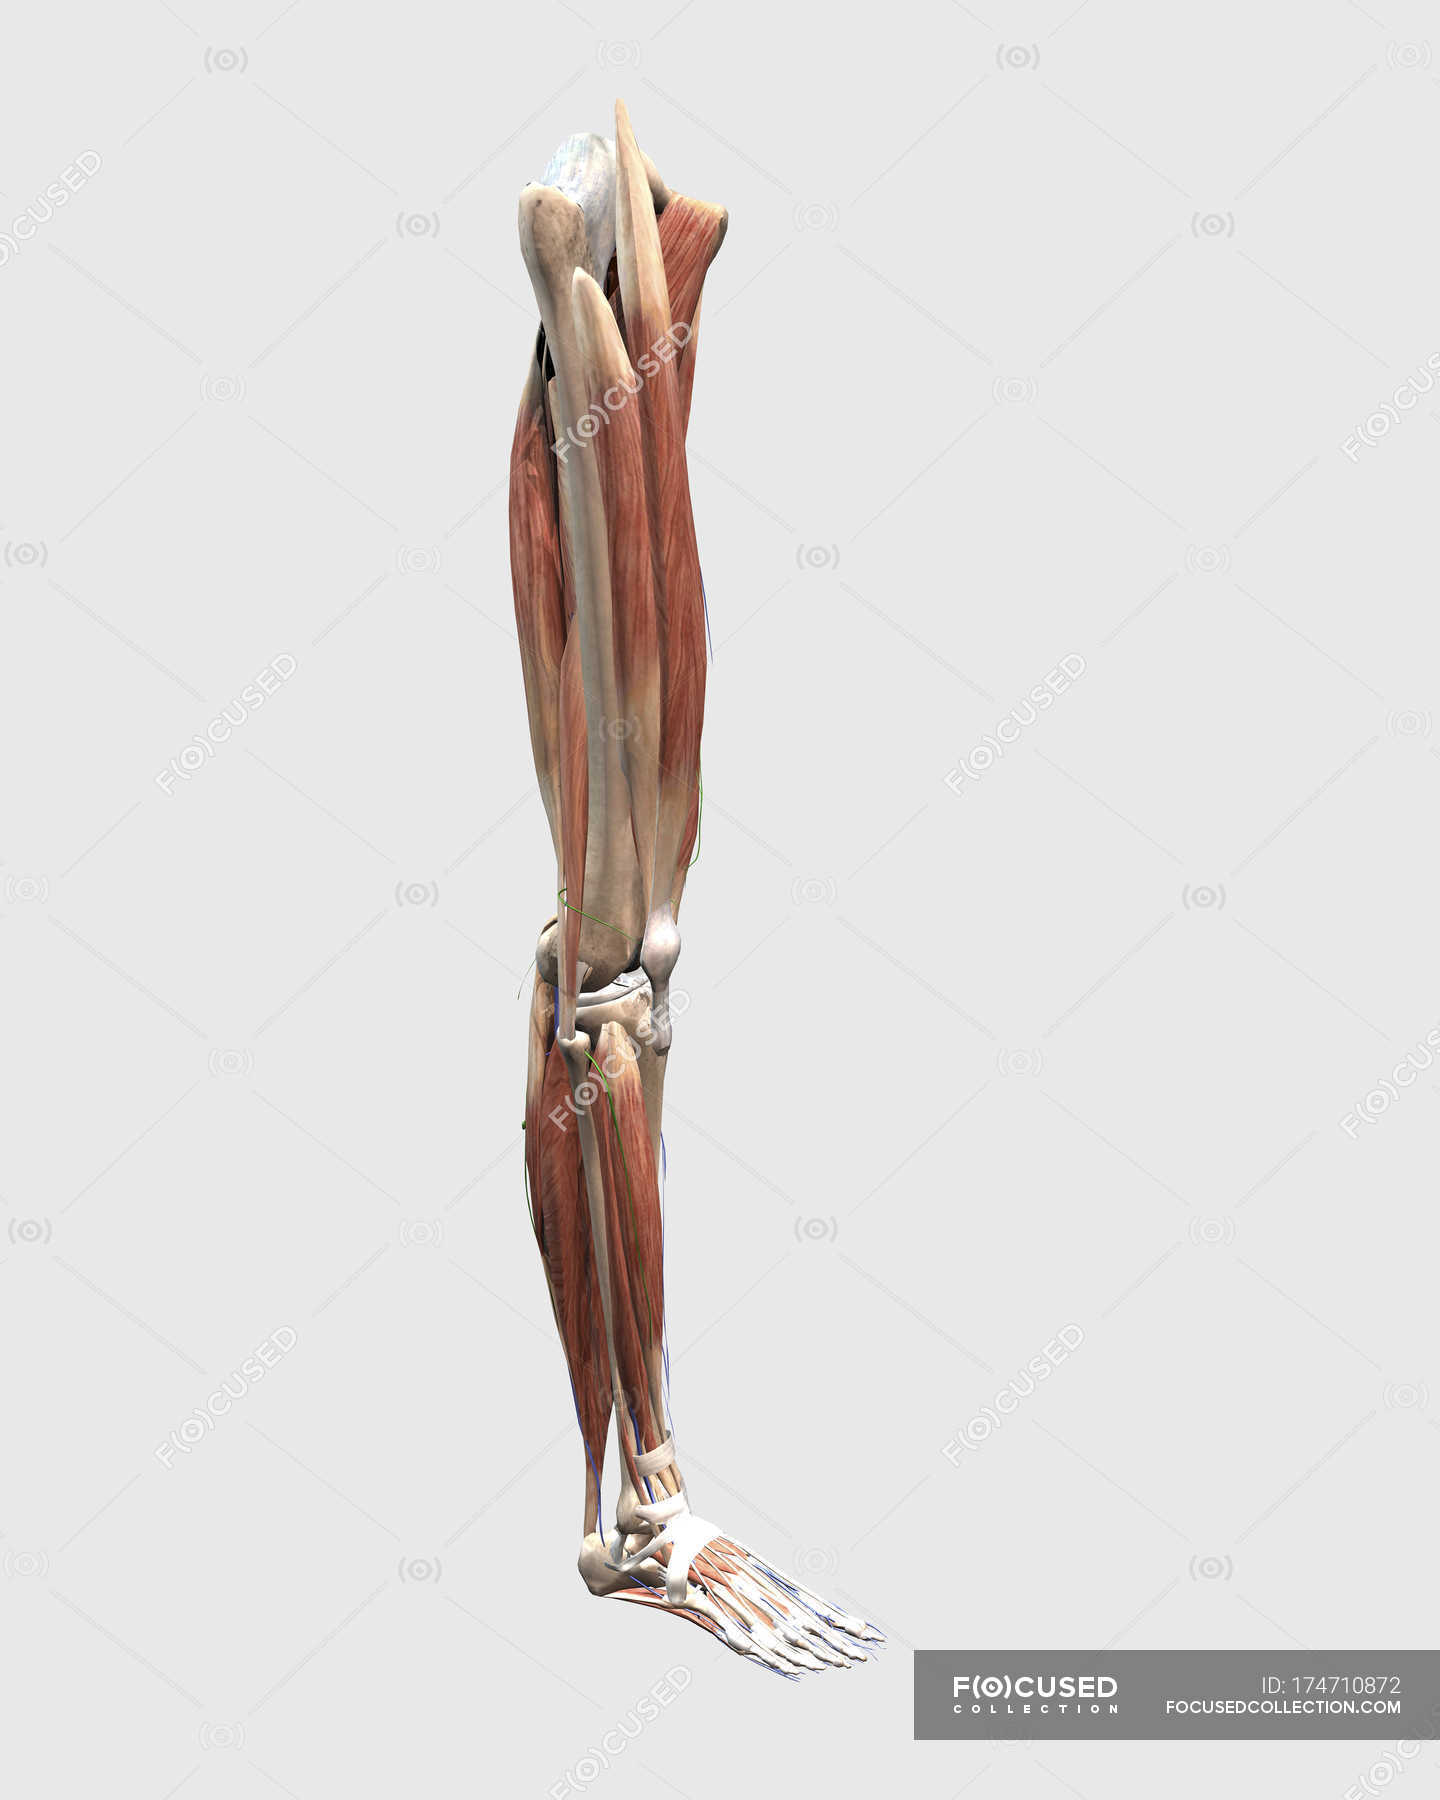 Medical Illustration Of Human Leg Muscles Bones And Joints Knee Ligaments Stock Photo 174710872